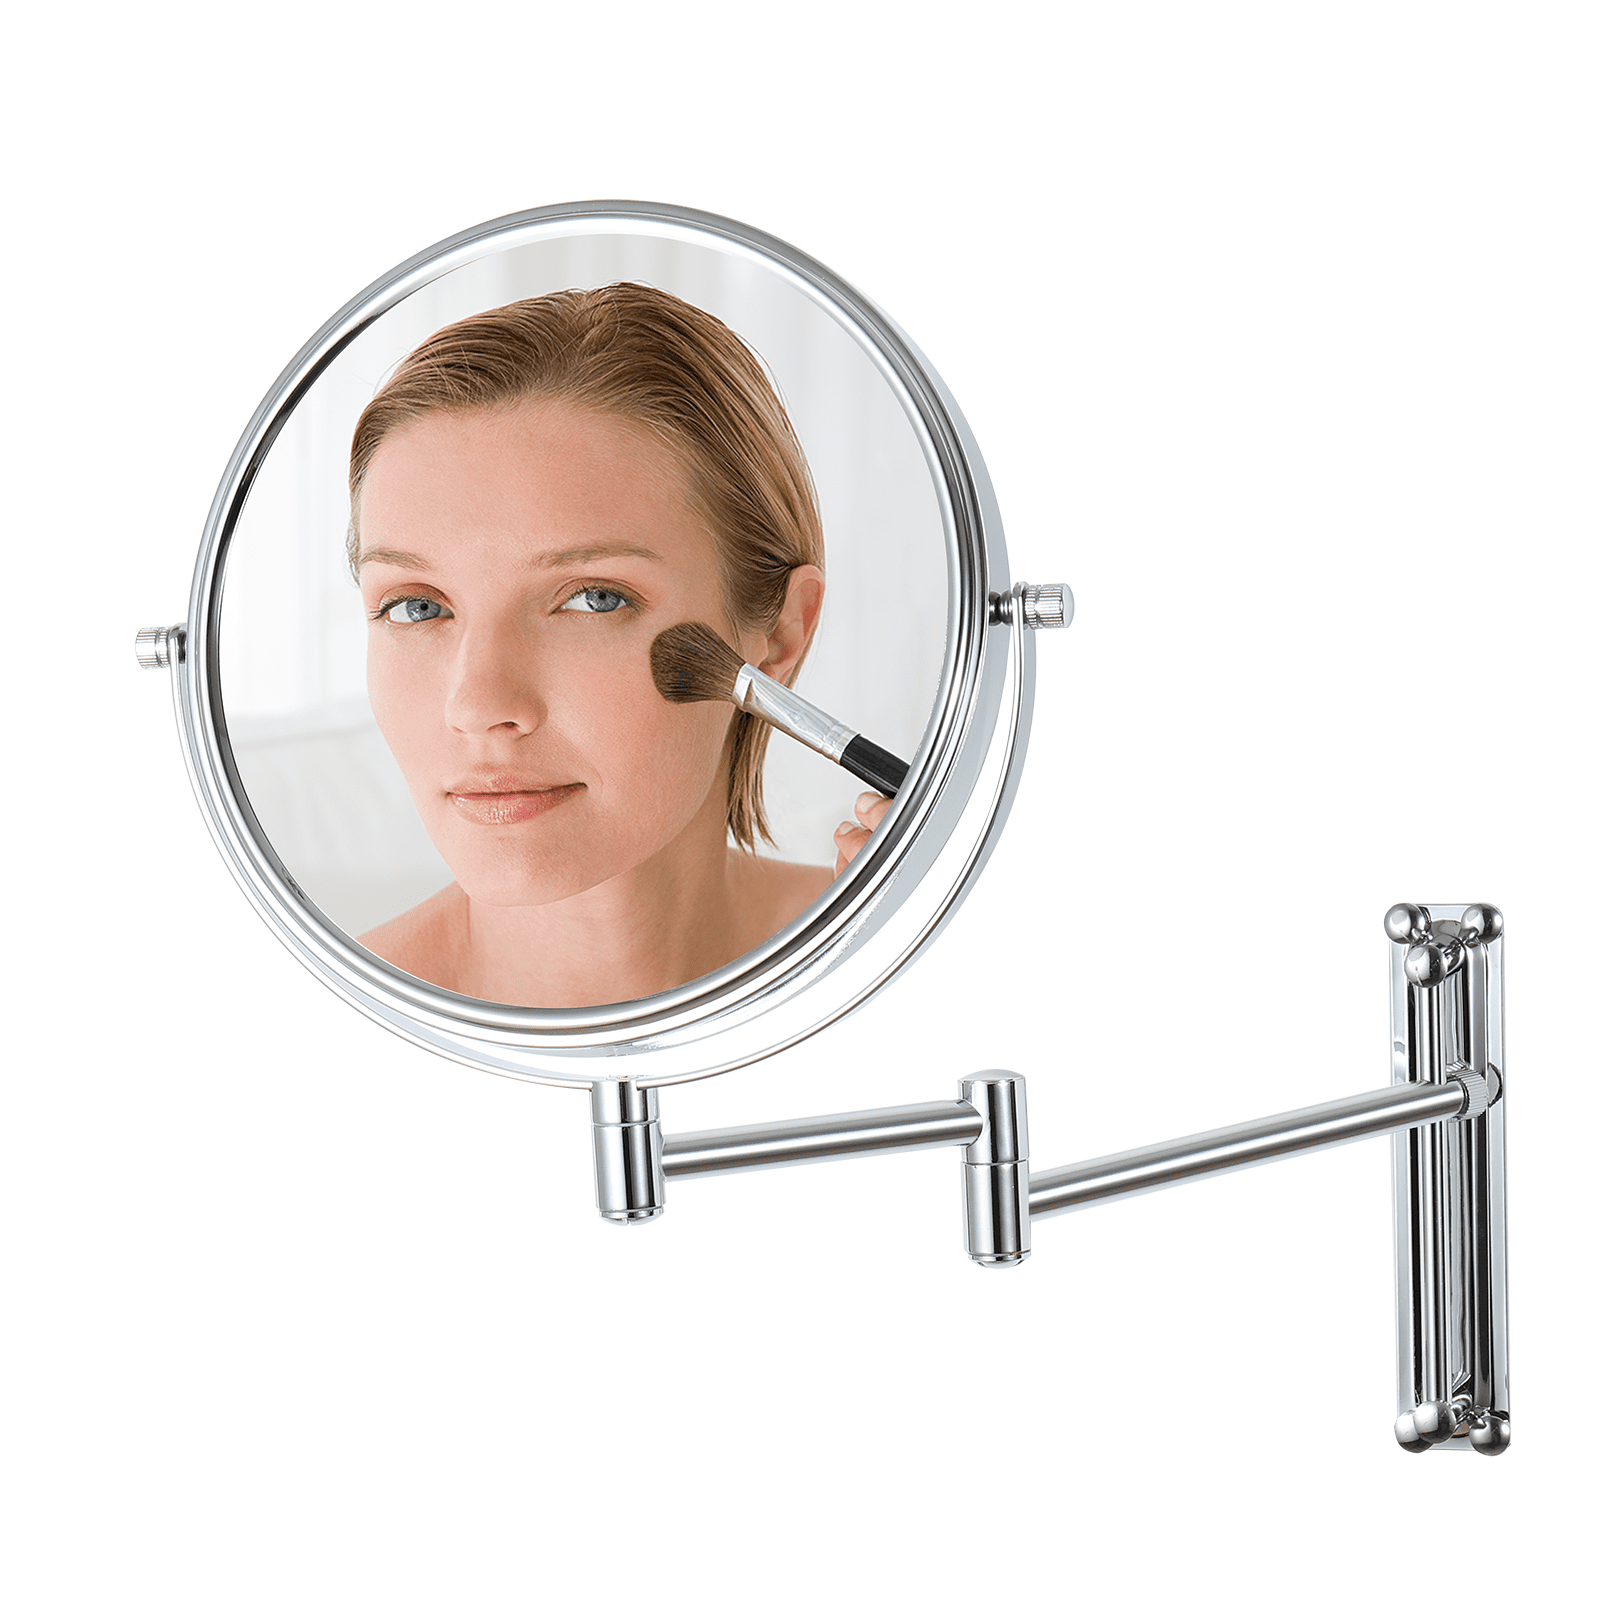 Wall Mount Makeup Mirror, 7X Magnification Mirror Adjustable Height Double- Sided Bathroom Mirrors Wall Mount, 360°Swivel Wall-Mounted Mirrors Vanity  Mirror for Bathroom or Bedroom, Shape Chrome